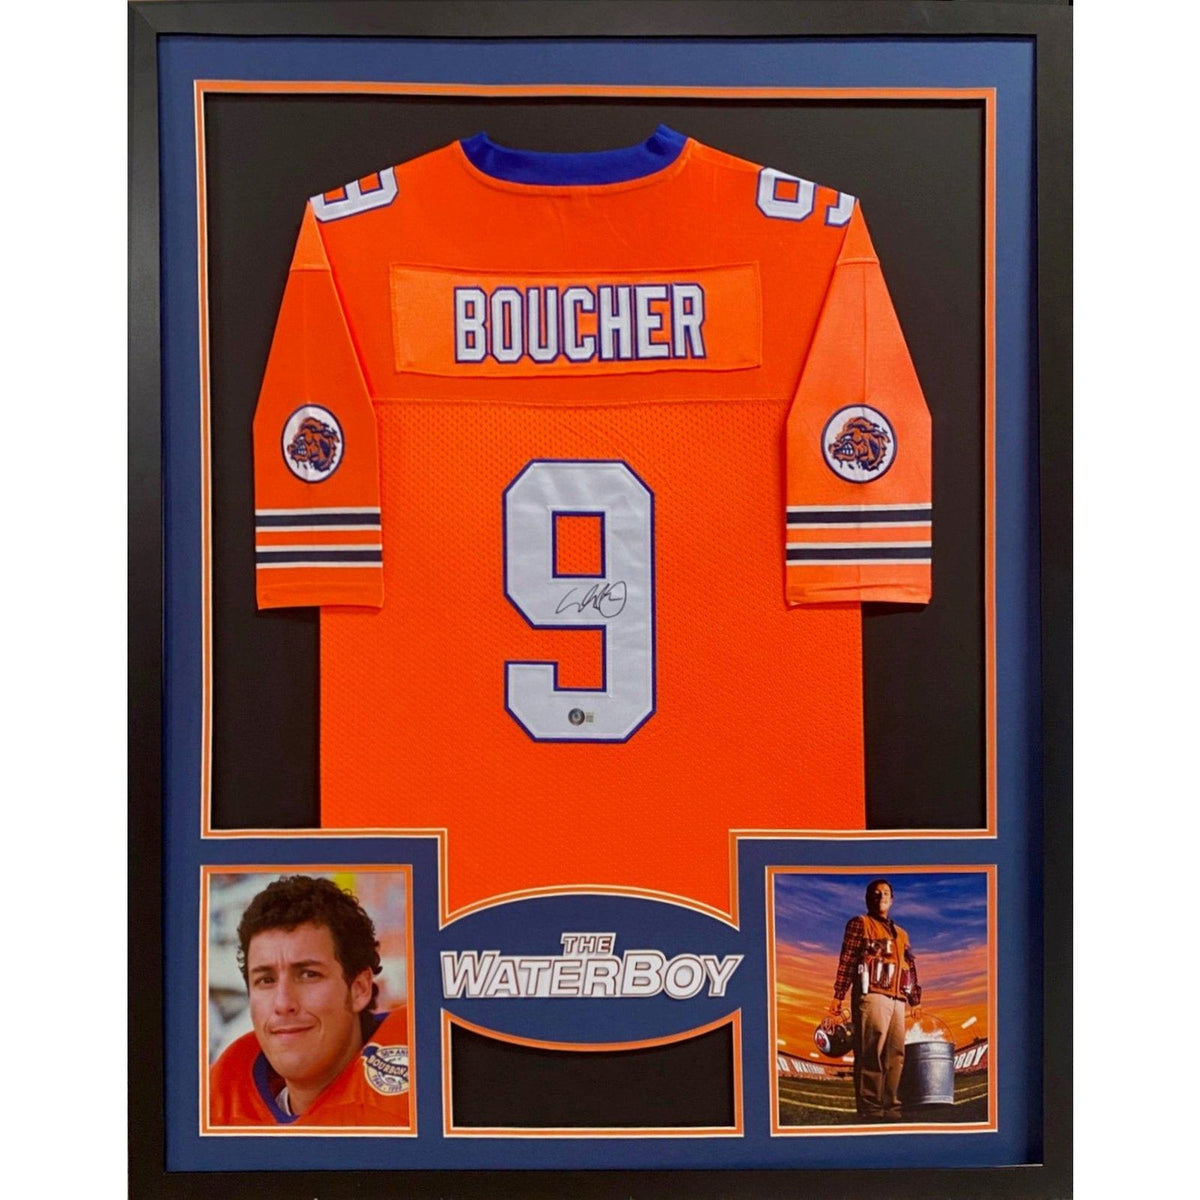 The Waterboy: A Character Study of Bobby Boucher